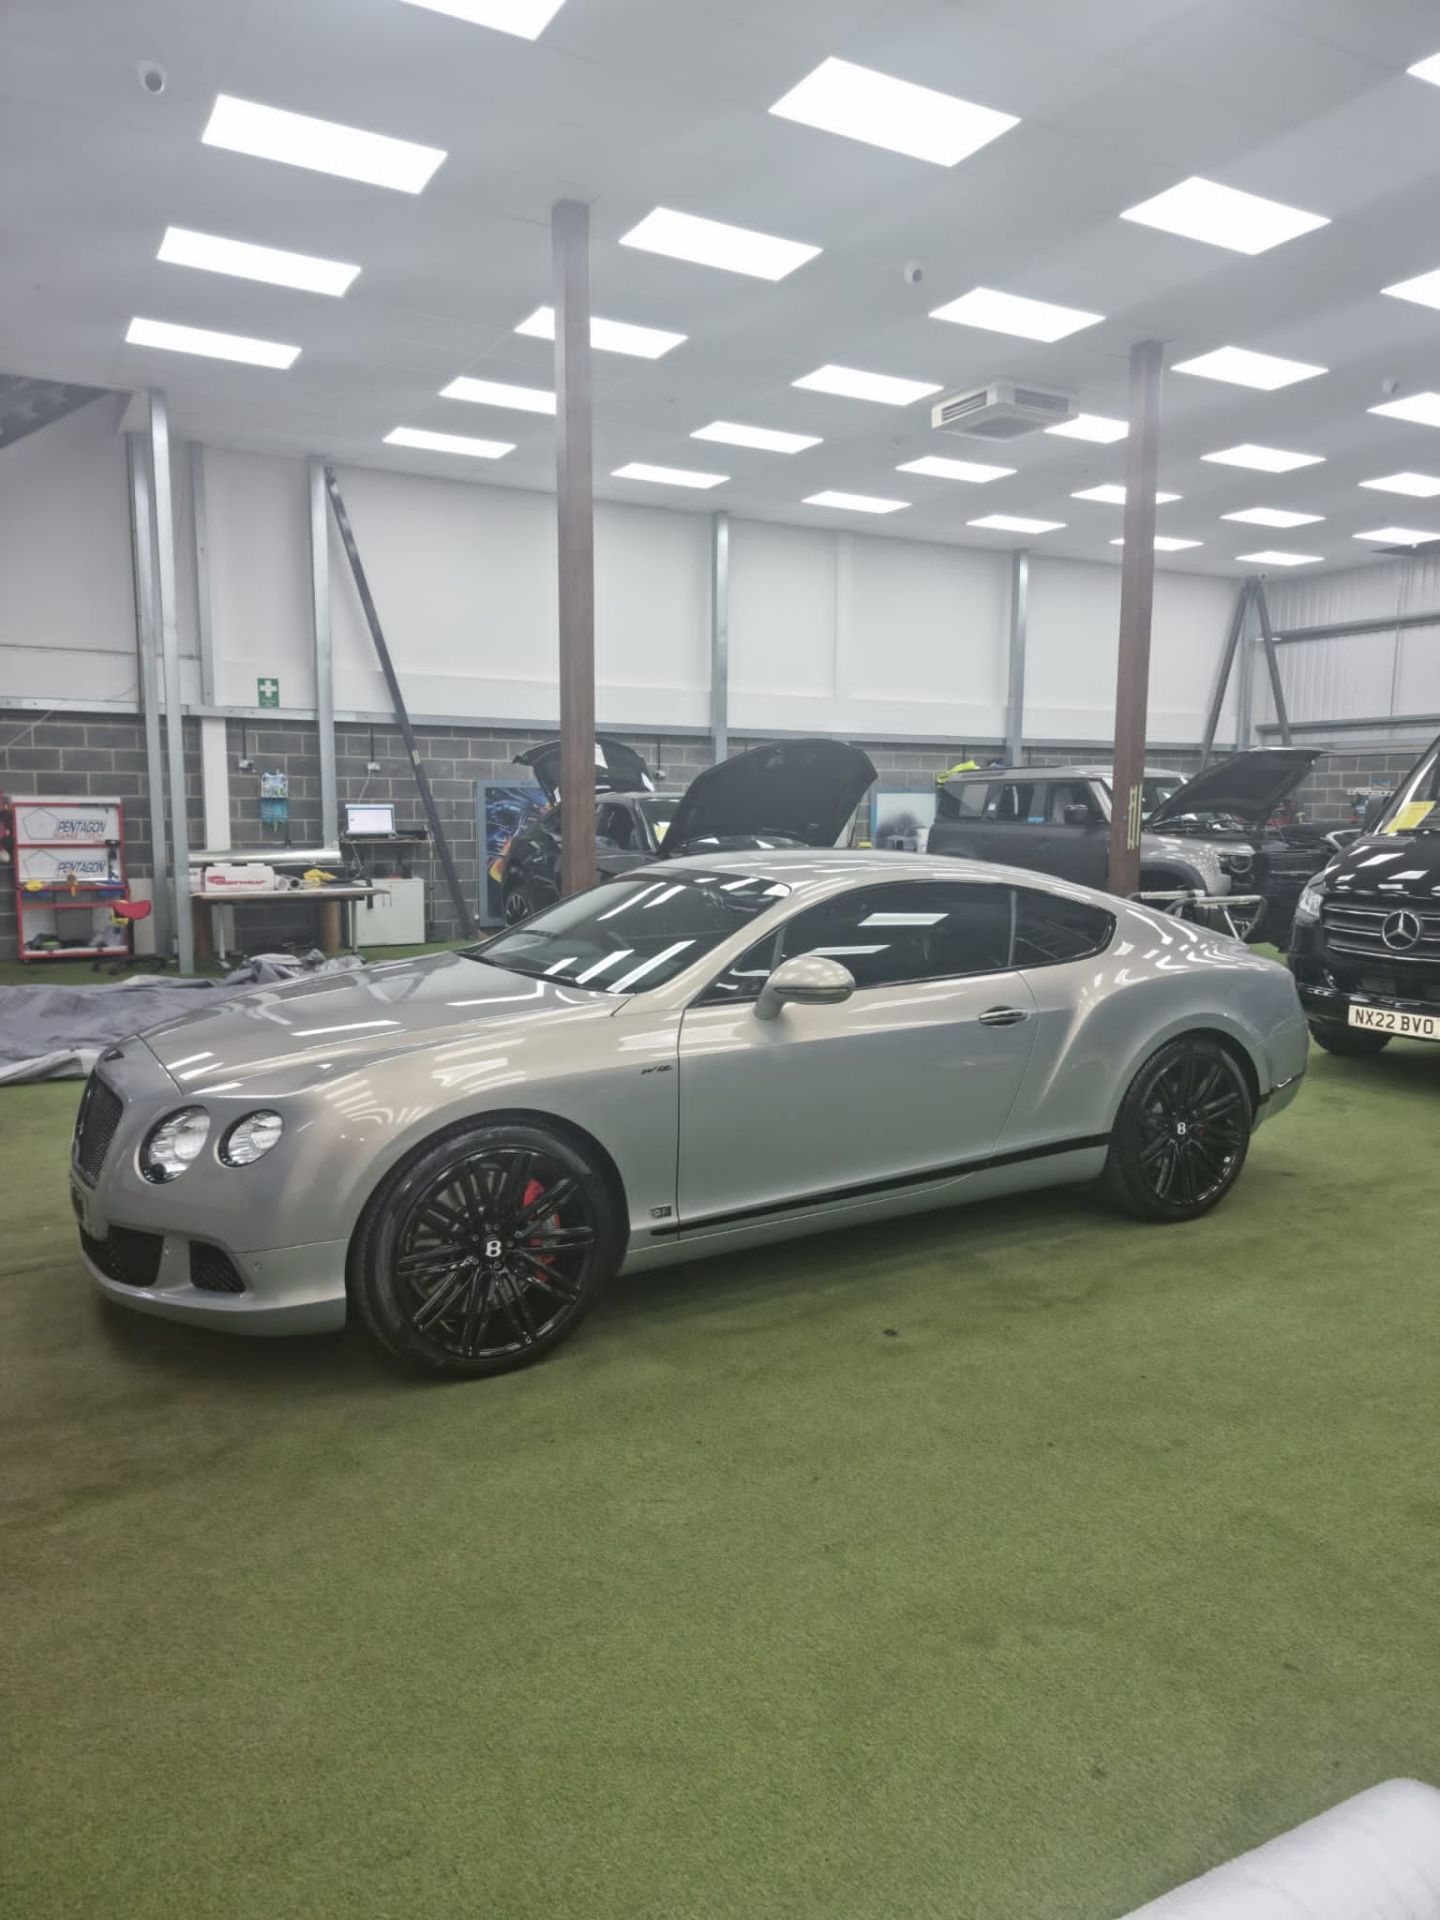 2013 BENTLEY CONTINENTAL GT SPEED AUTO GREY COUPE, 56k miles, 626 BHP, 5998 cc PETROL - Image 8 of 16